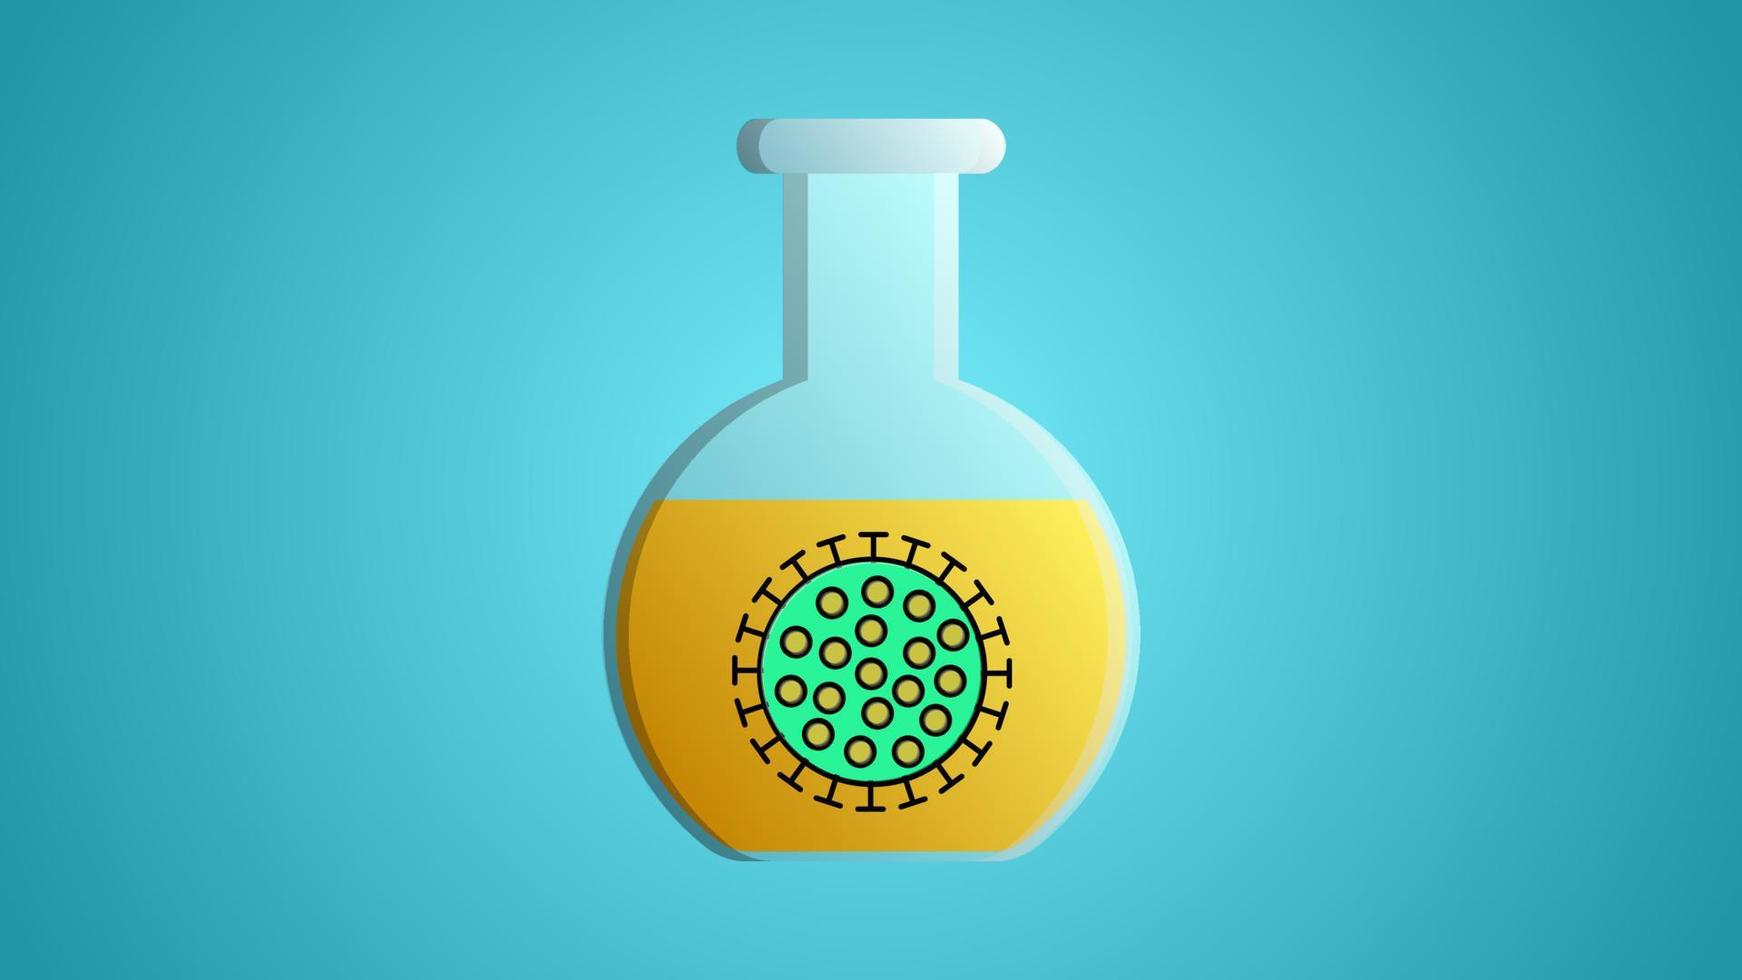 Glass laboratory medical flask scientific for the diagnosis and research of coronavirus infection disease covid-19 virus molecule on a blue background vector